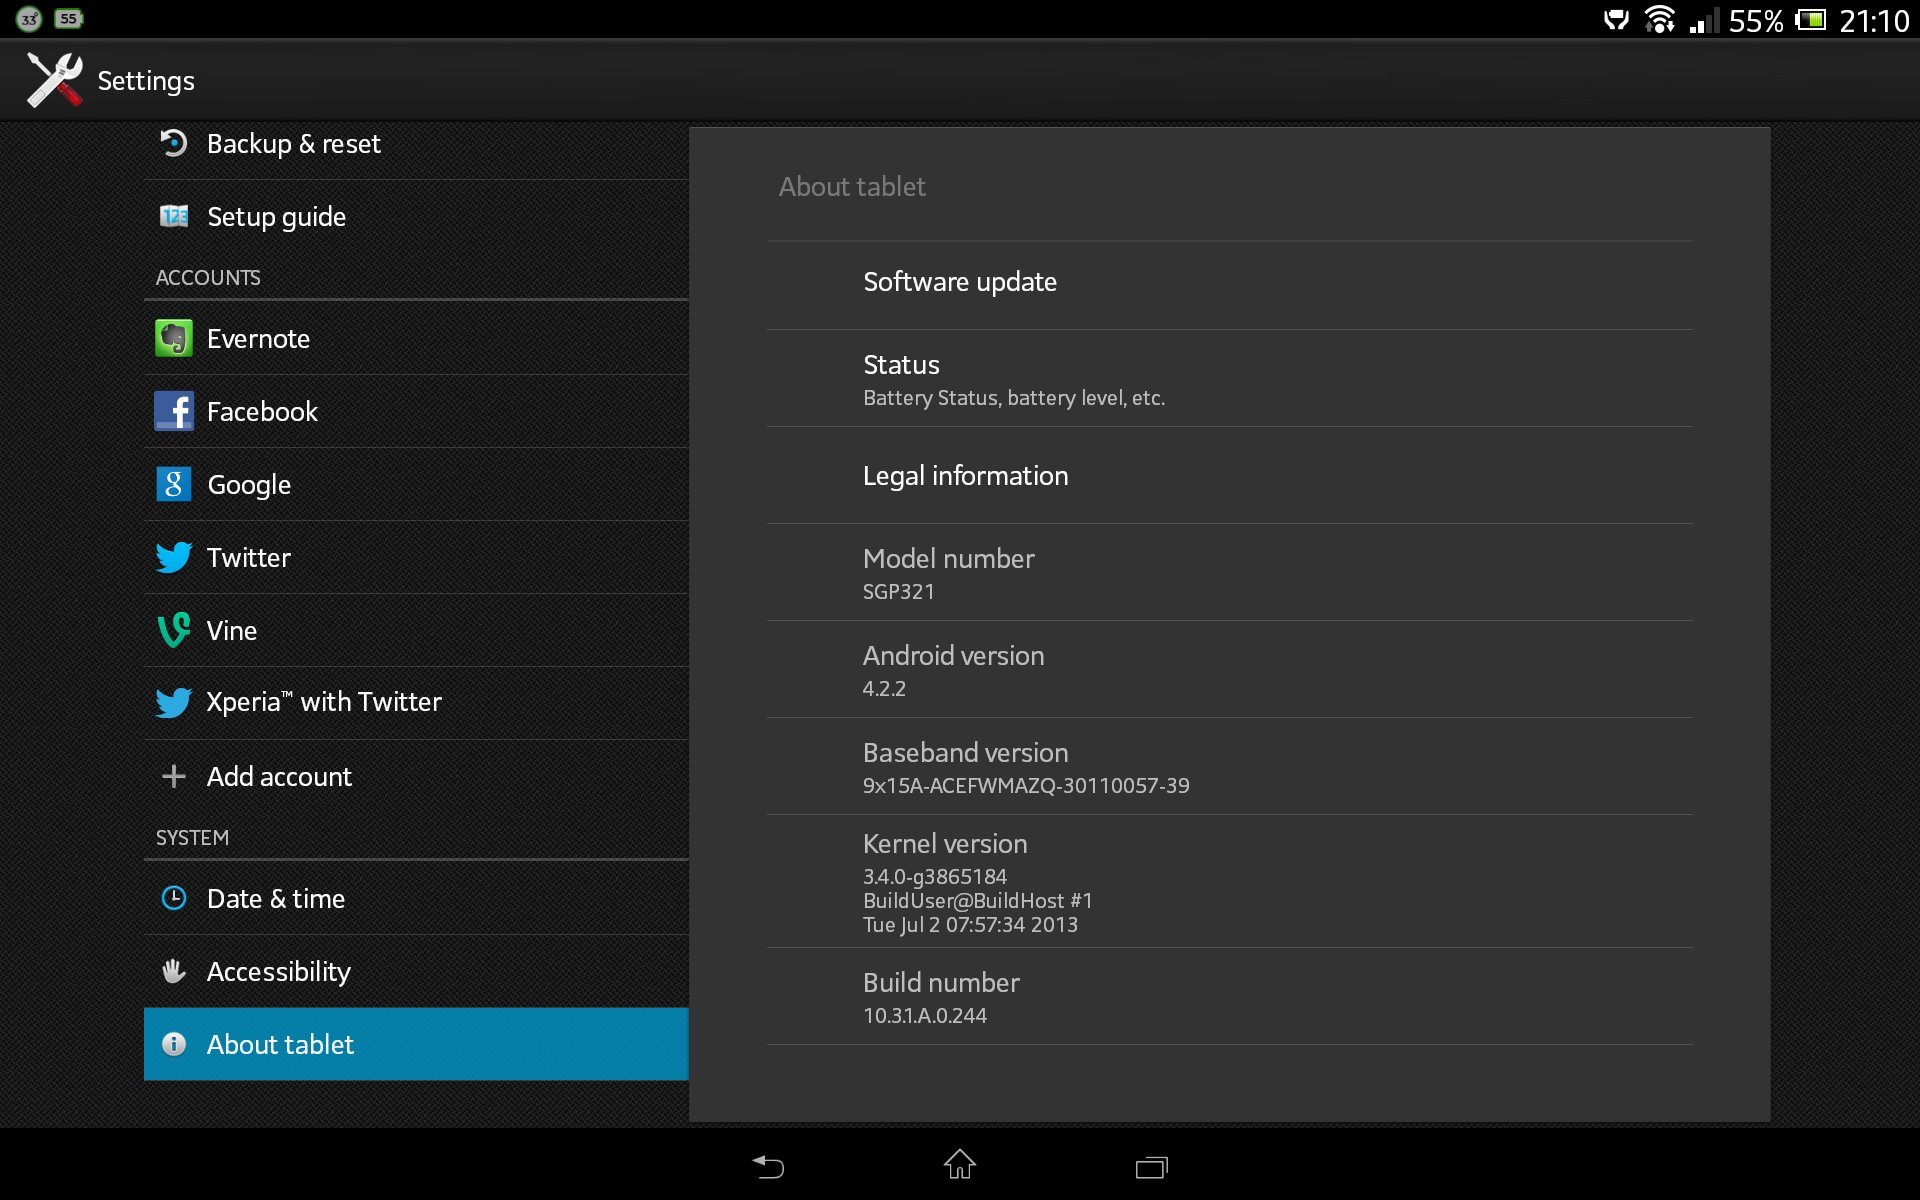 Xperia Tablet Z SGP321 Android 4.2.2 10.3.1.A.0.244 firmware update Details